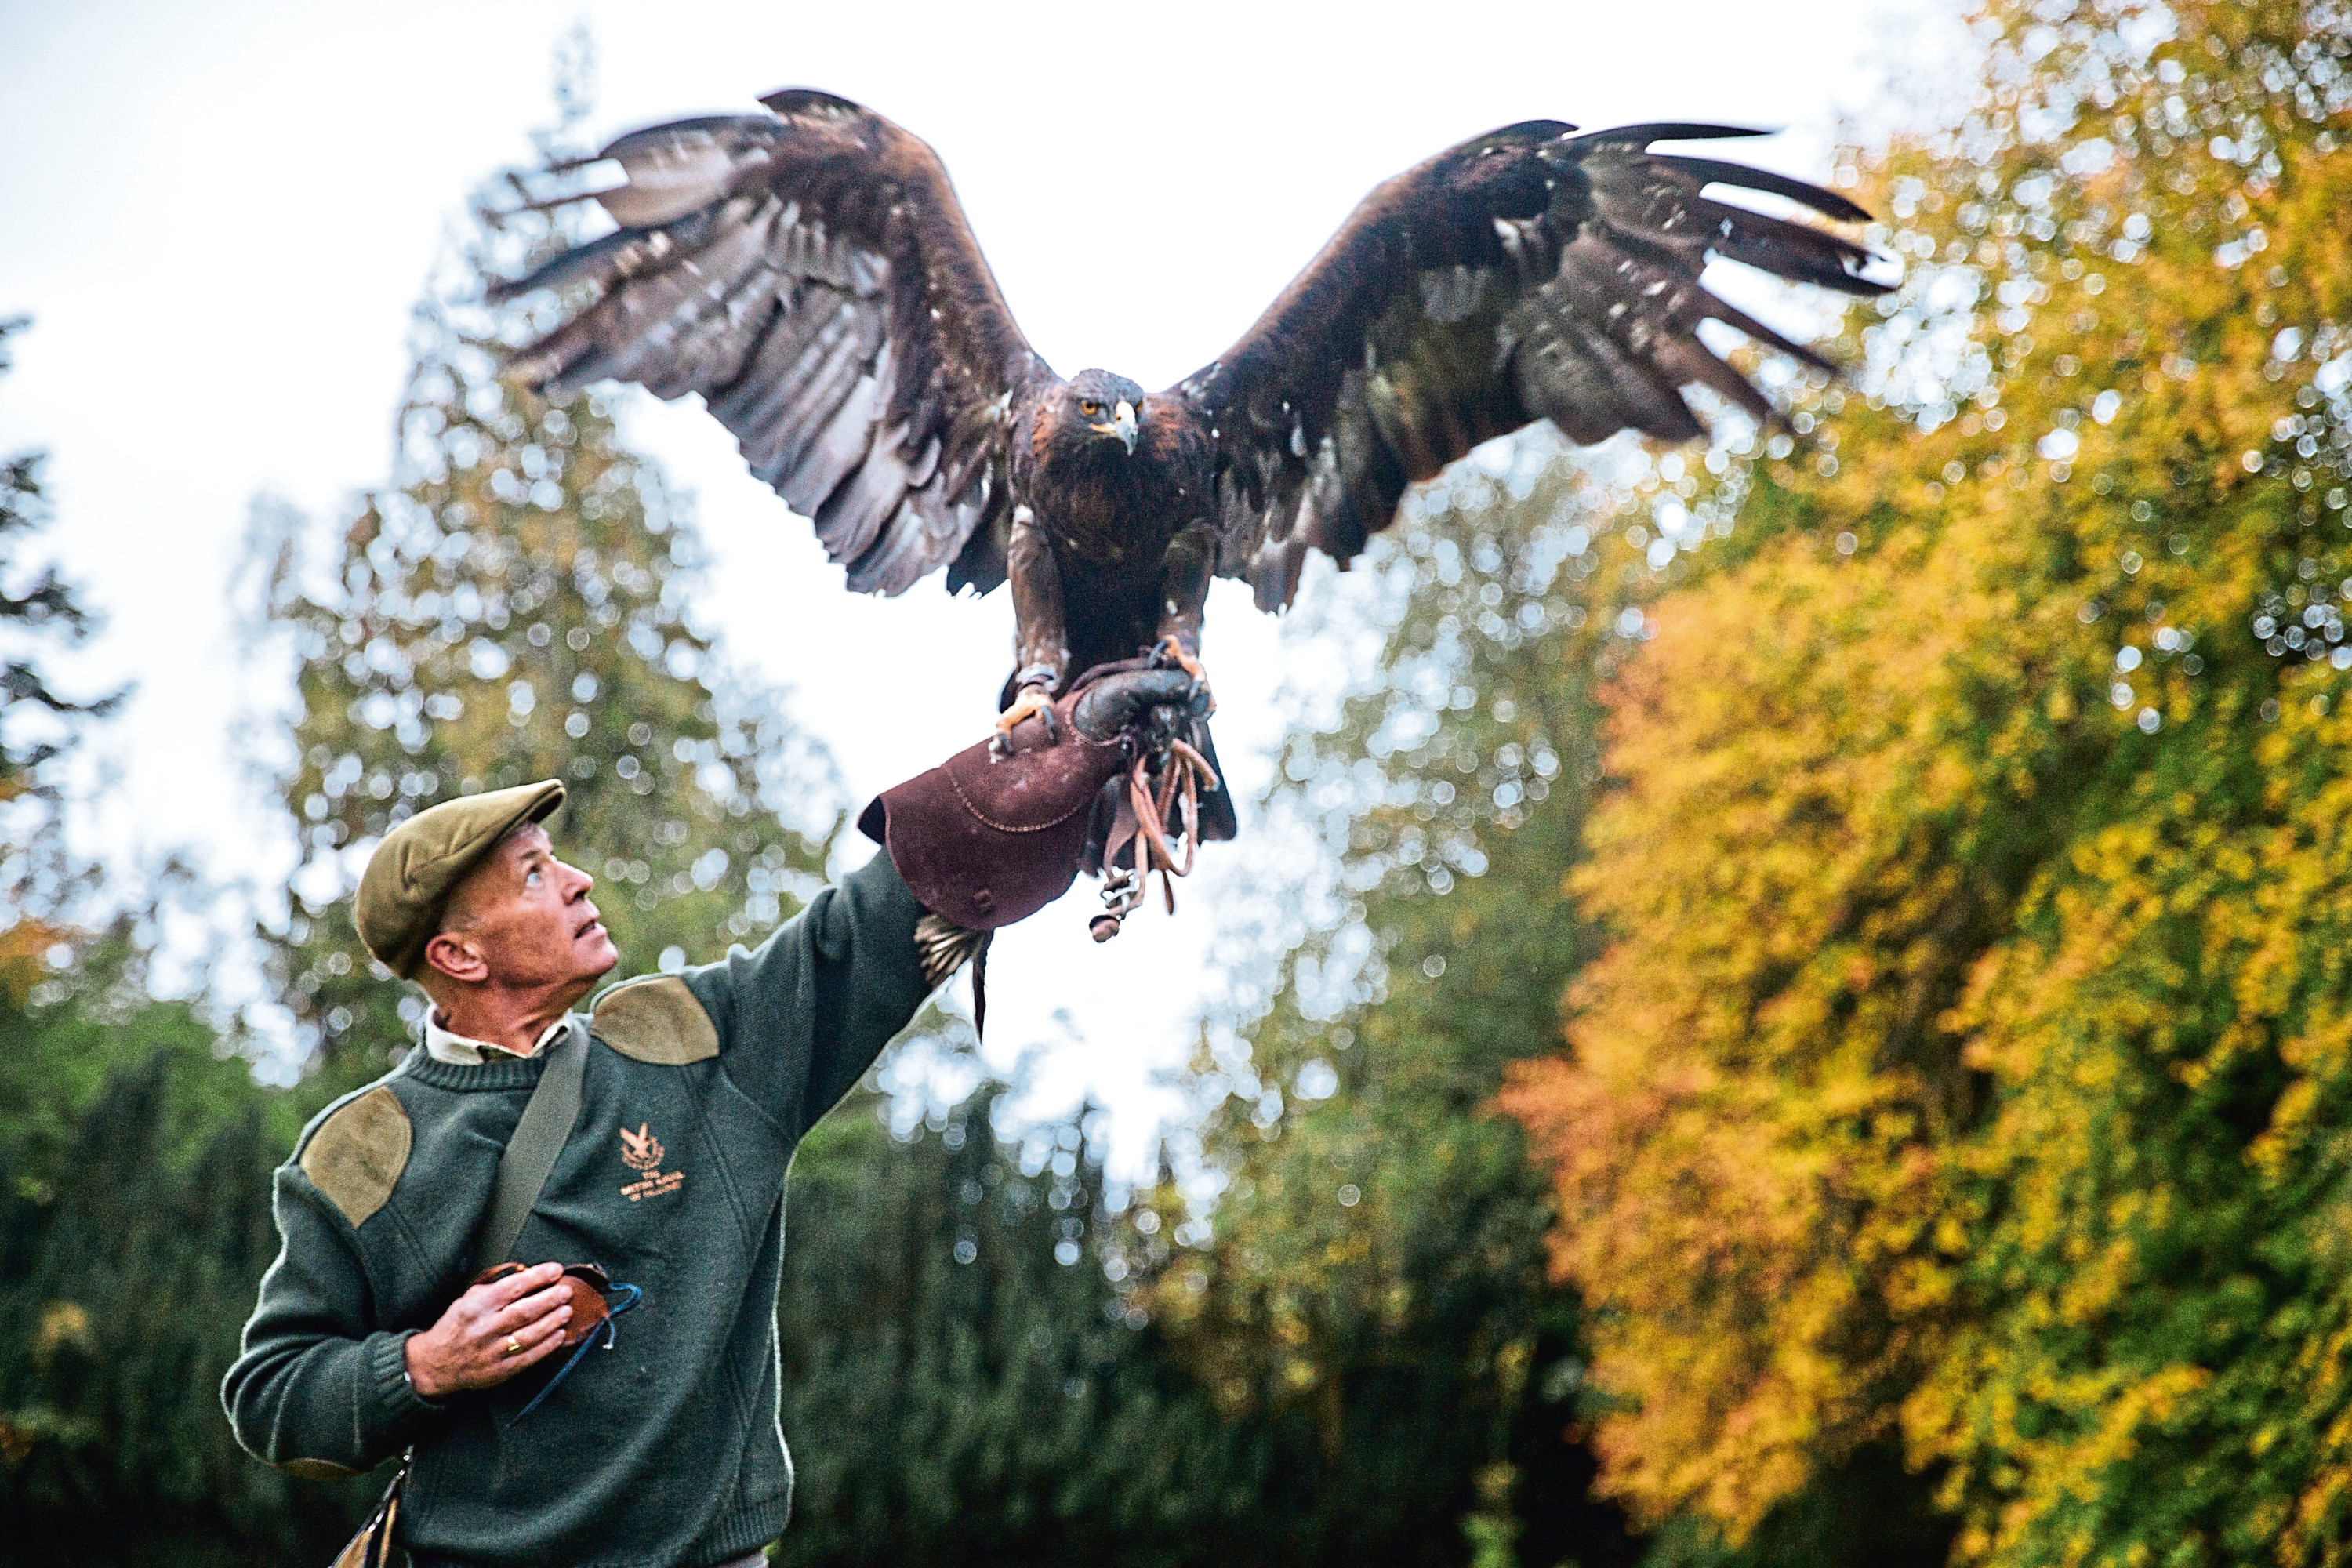 Visitors can handle a bird
during the falconry lesson